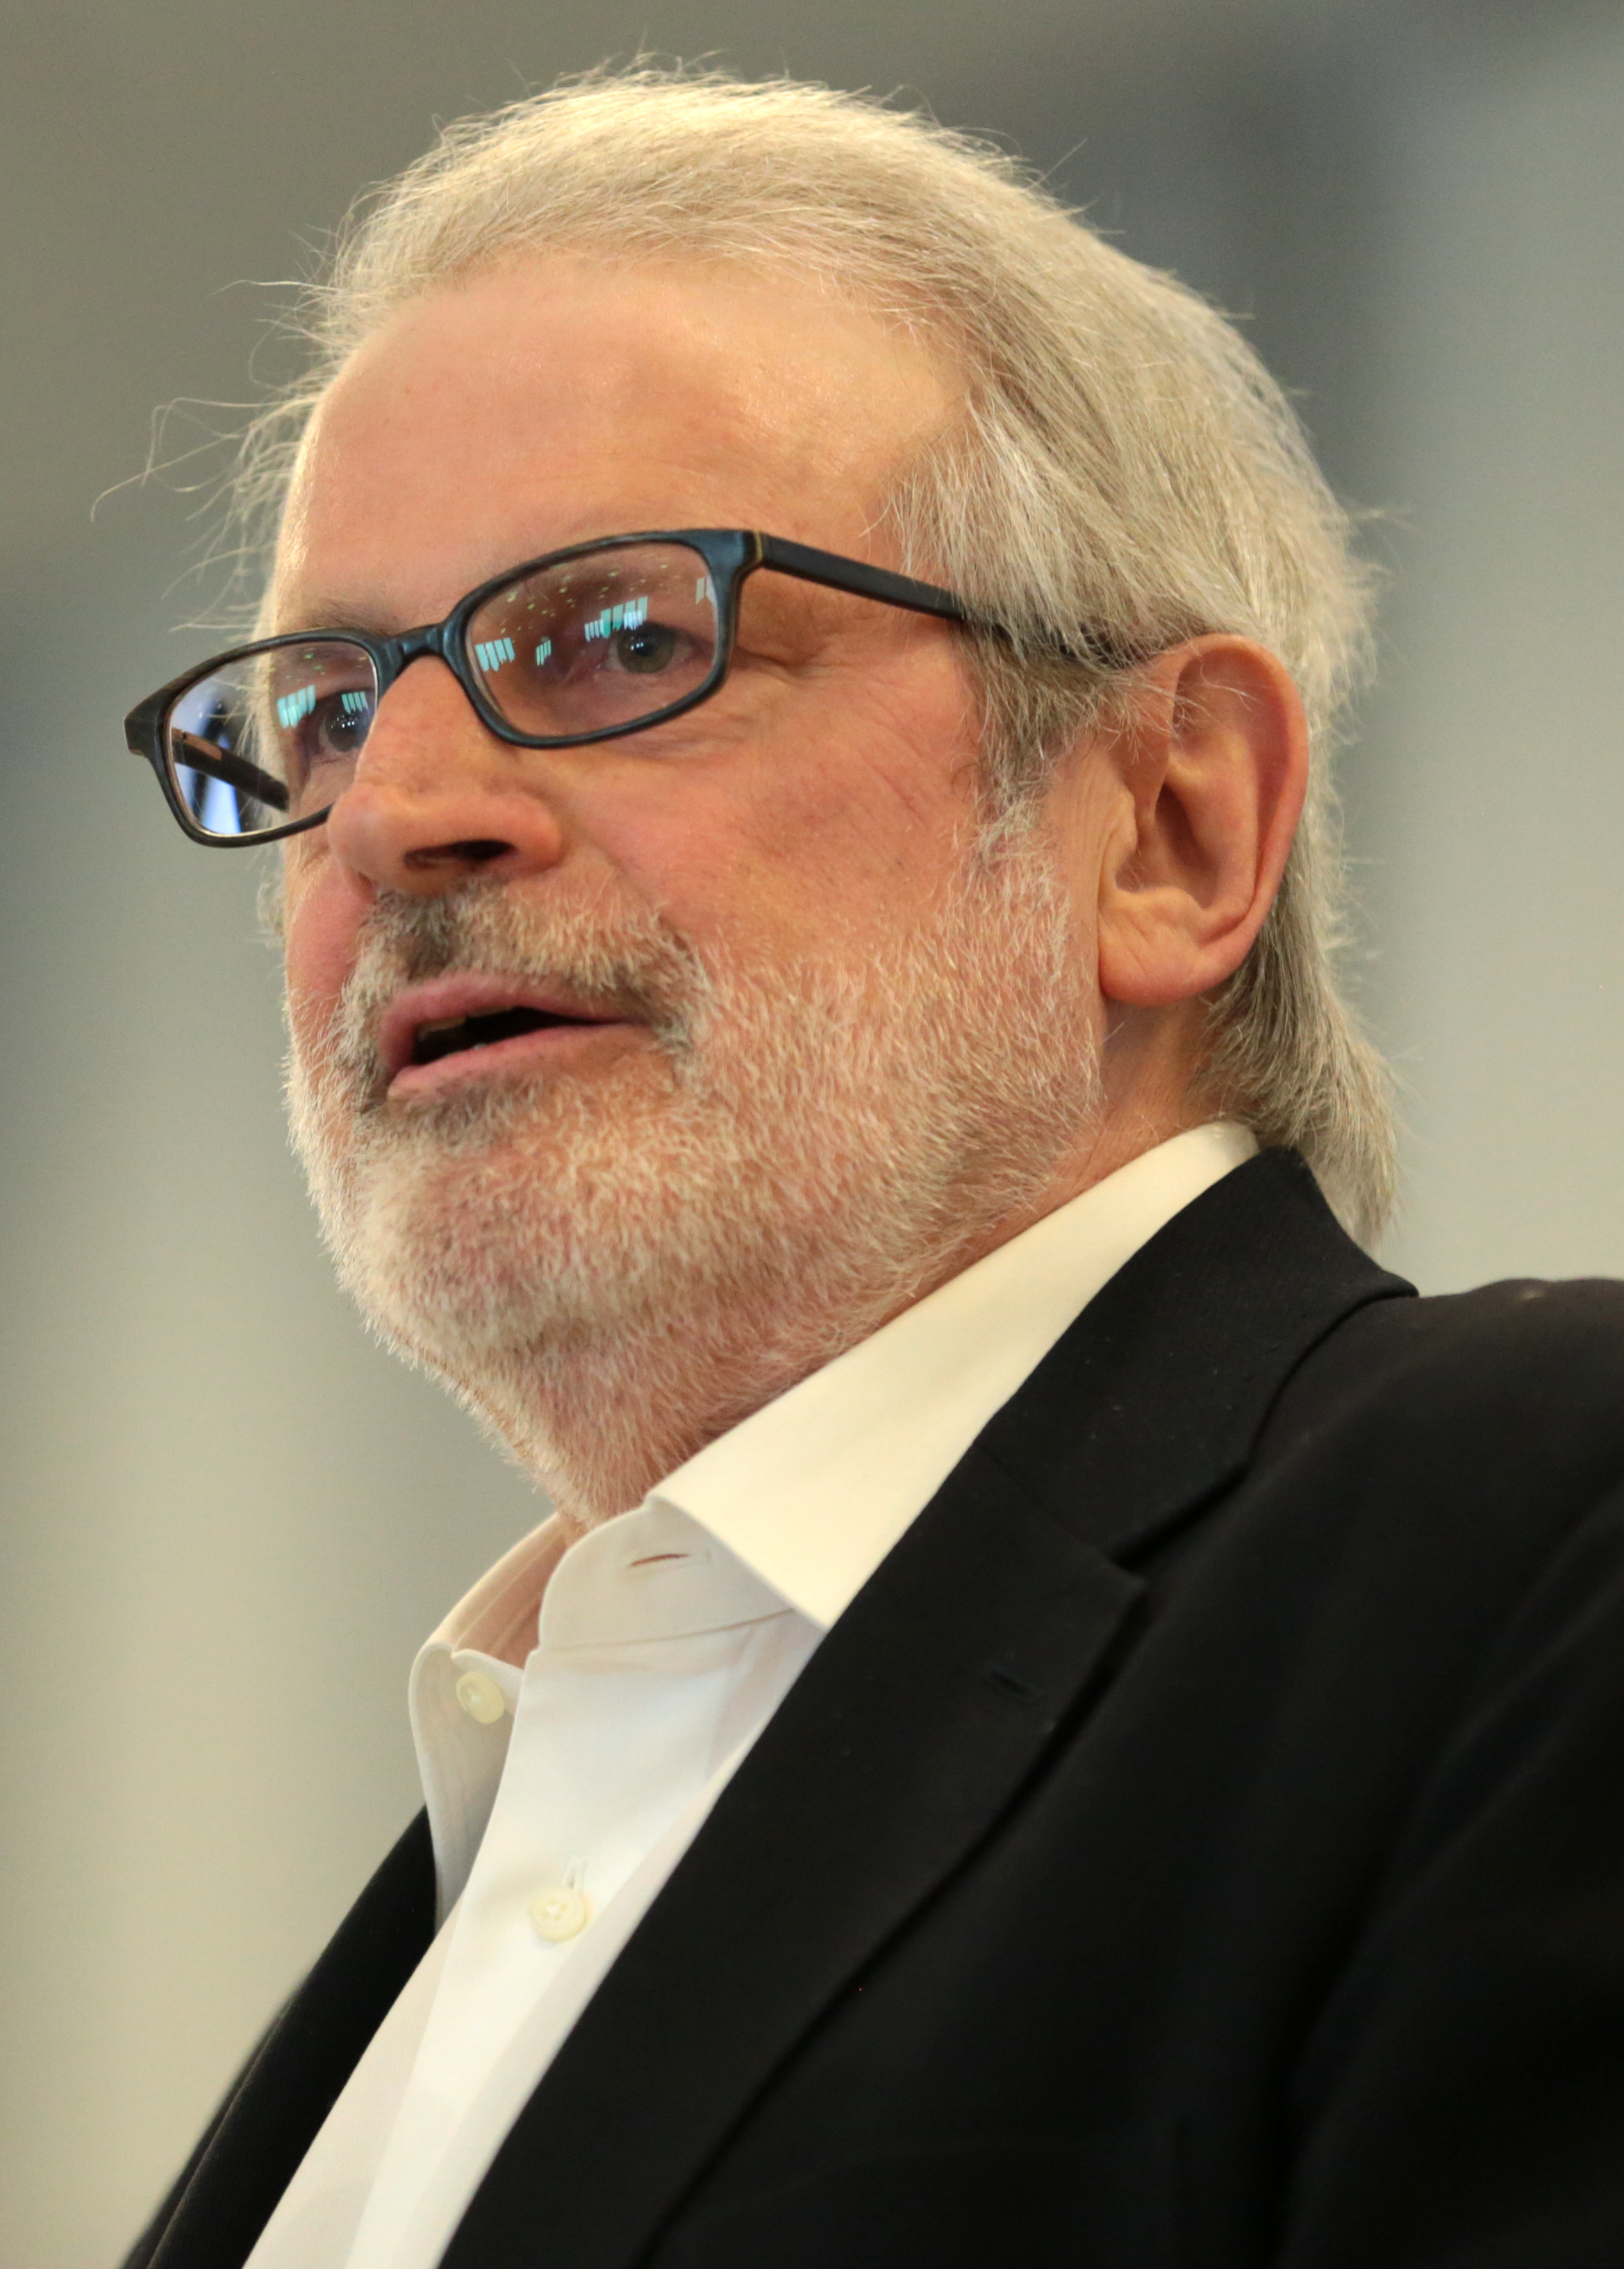 Stockman in 2017